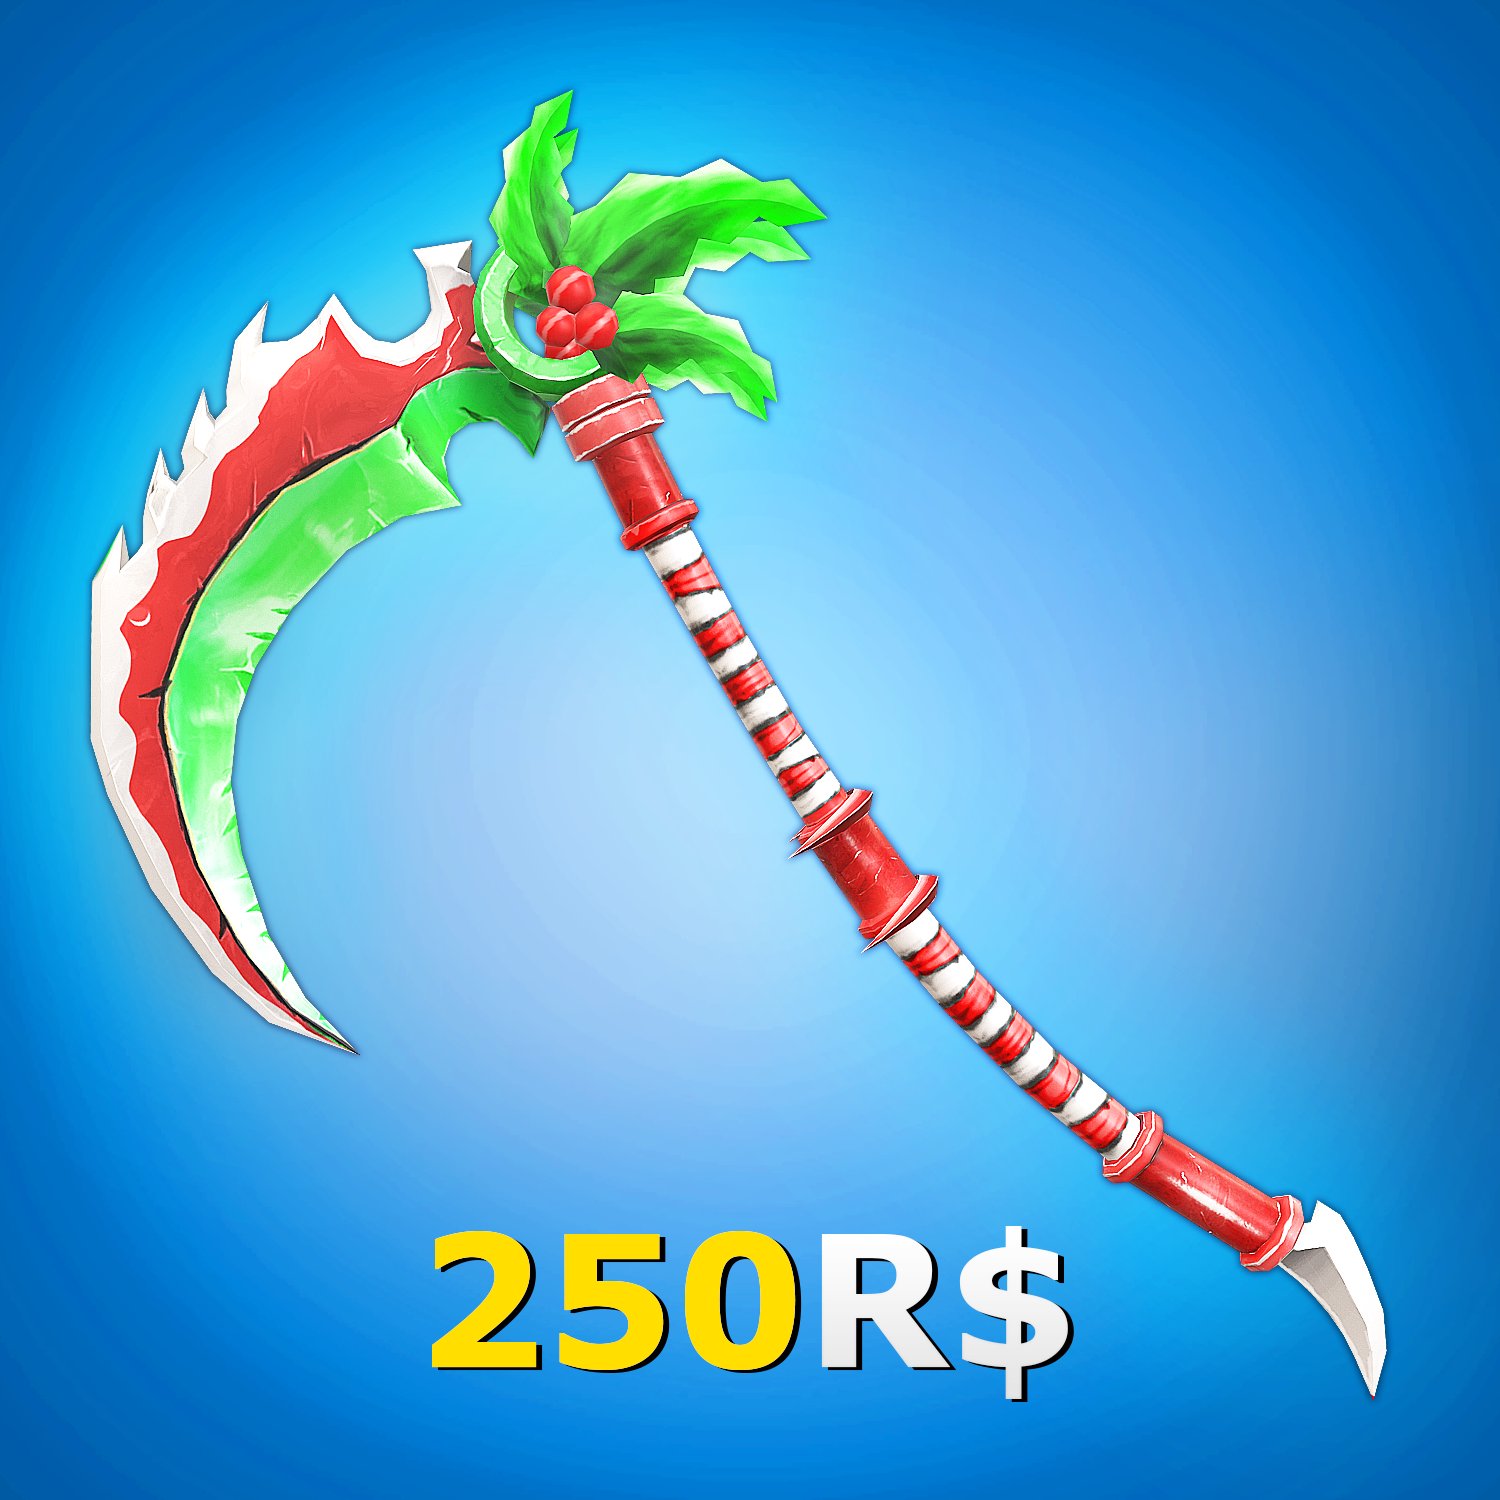 Youri Hoek On Twitter Hey Robloxians The Limited Edition Christmas Scythe Is Now On Sale For Just 250 Robux Get Yours At Https T Co Xqgk25tvyi Https T Co 7xbk1ehklr - youri hoek on twitter free robux if you dont send me a